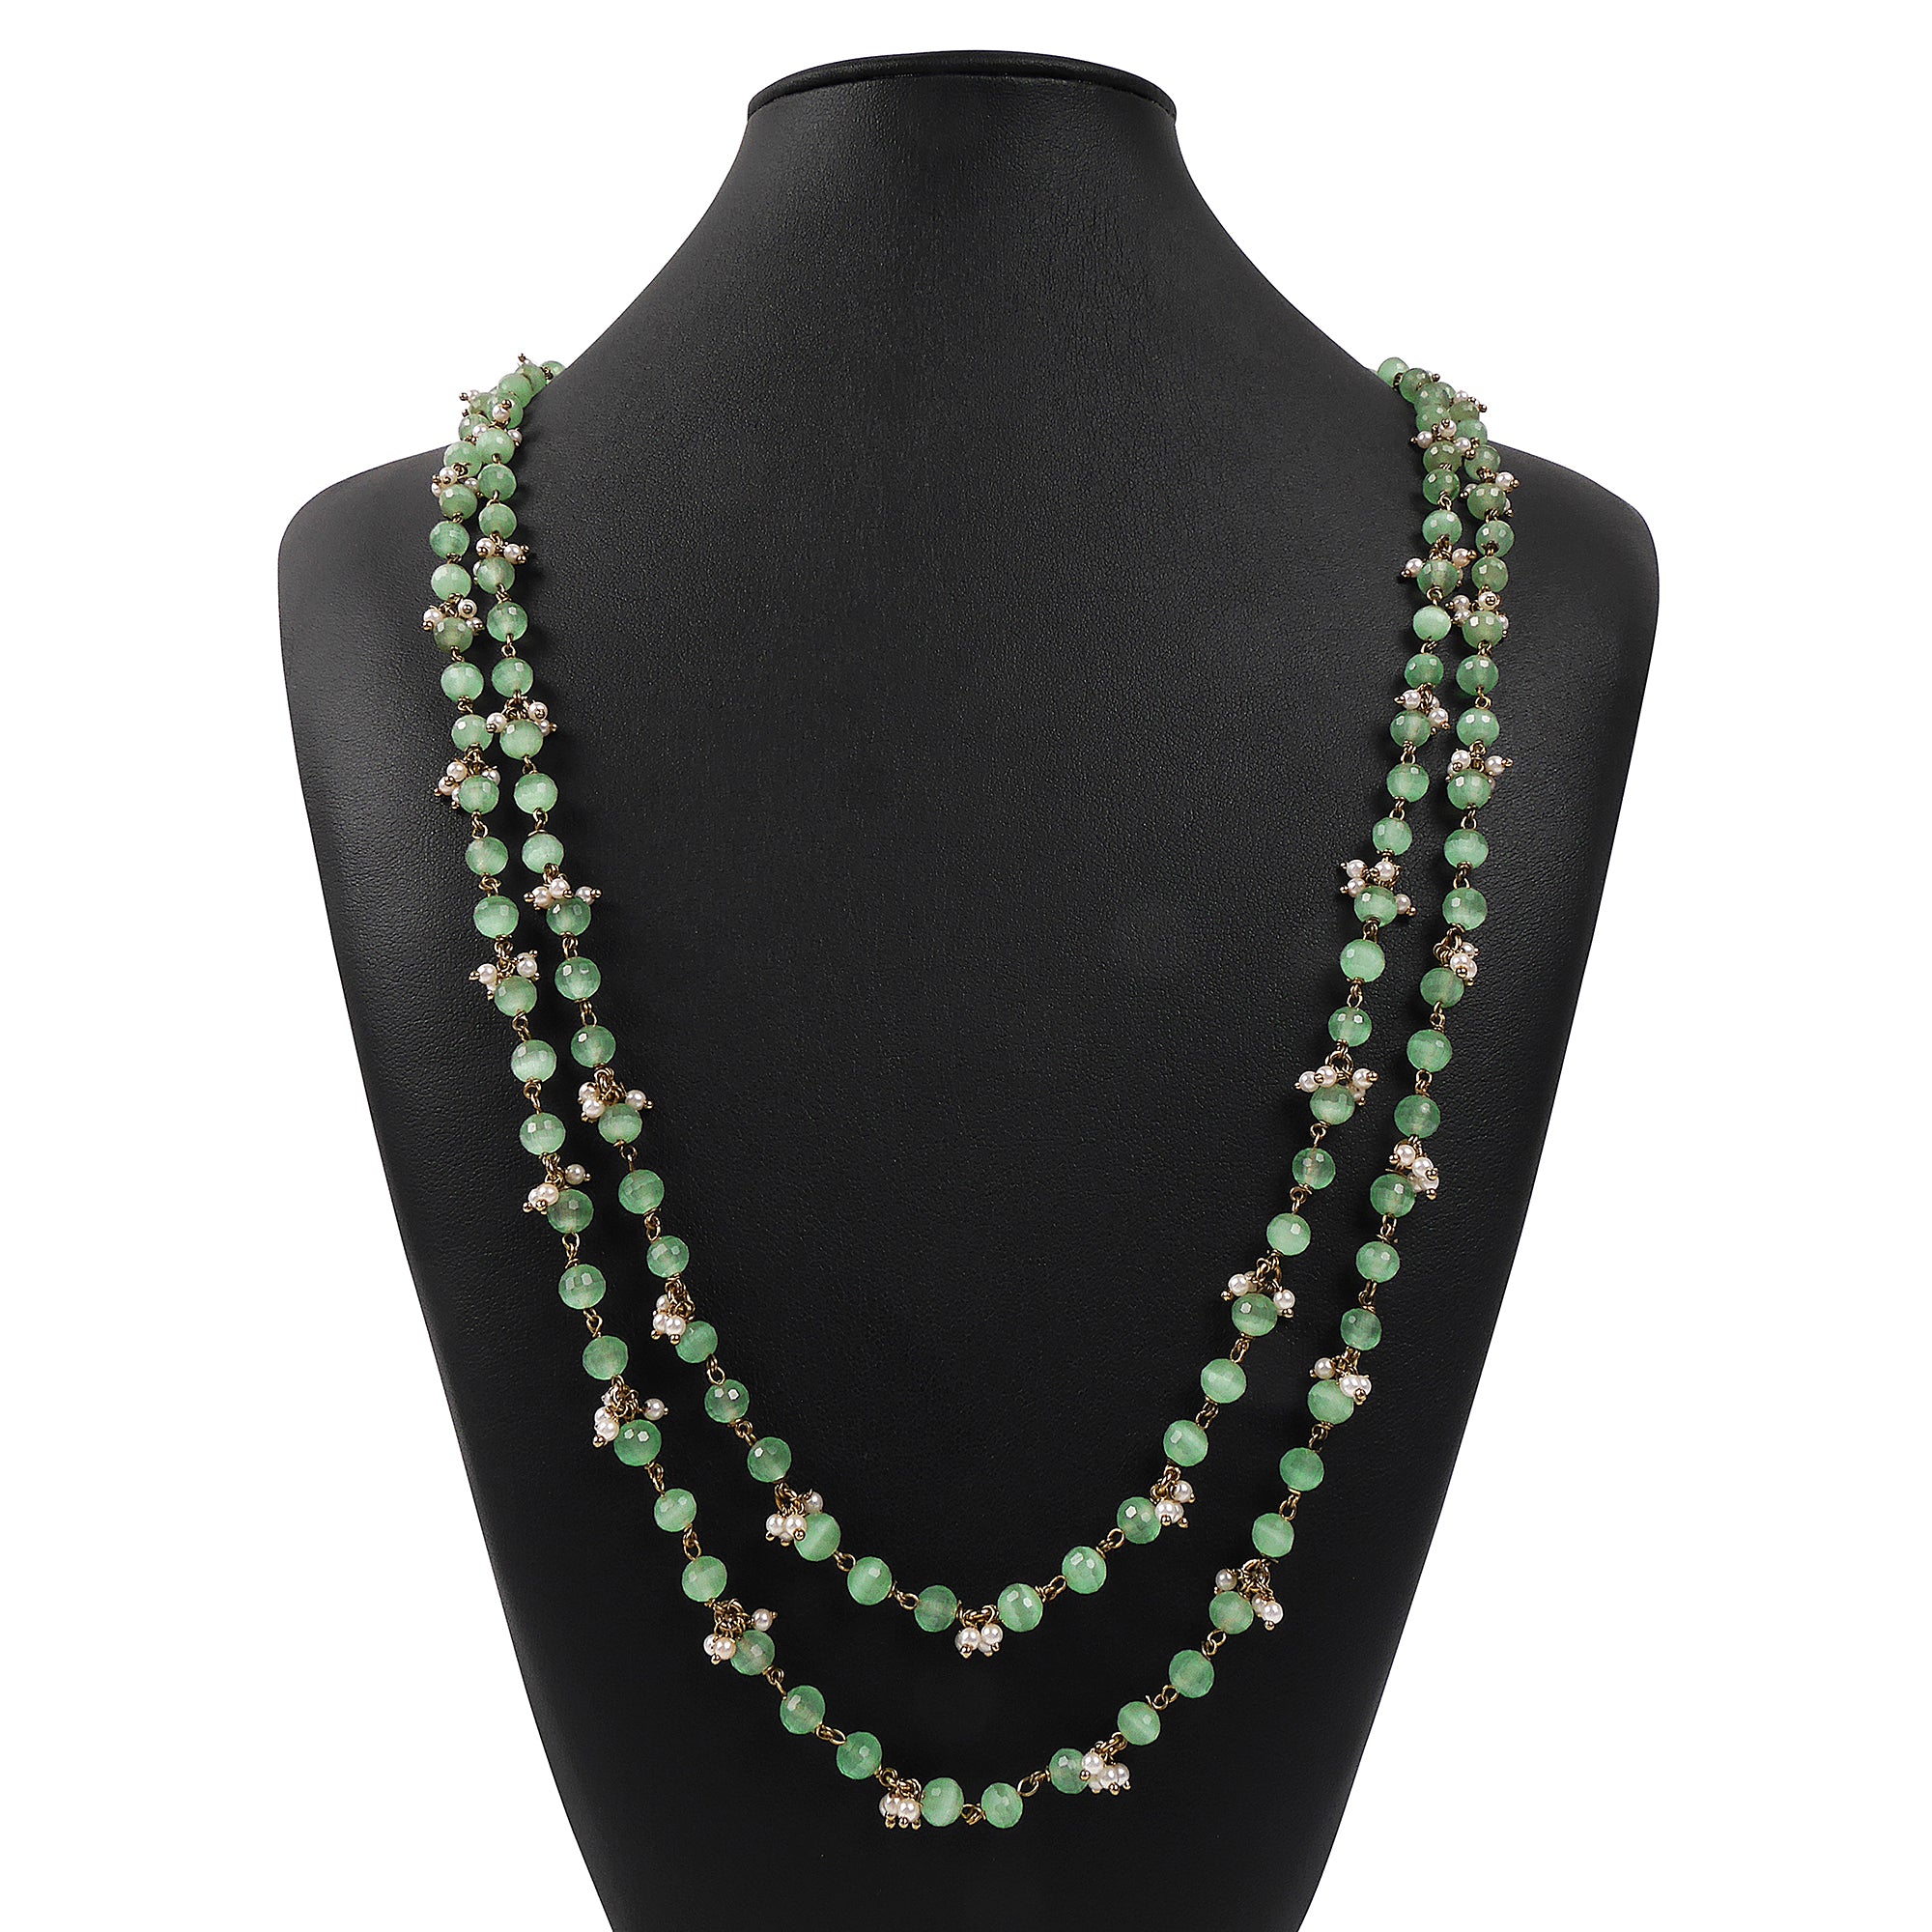 Ilana Layered Mint Necklace with Pearls